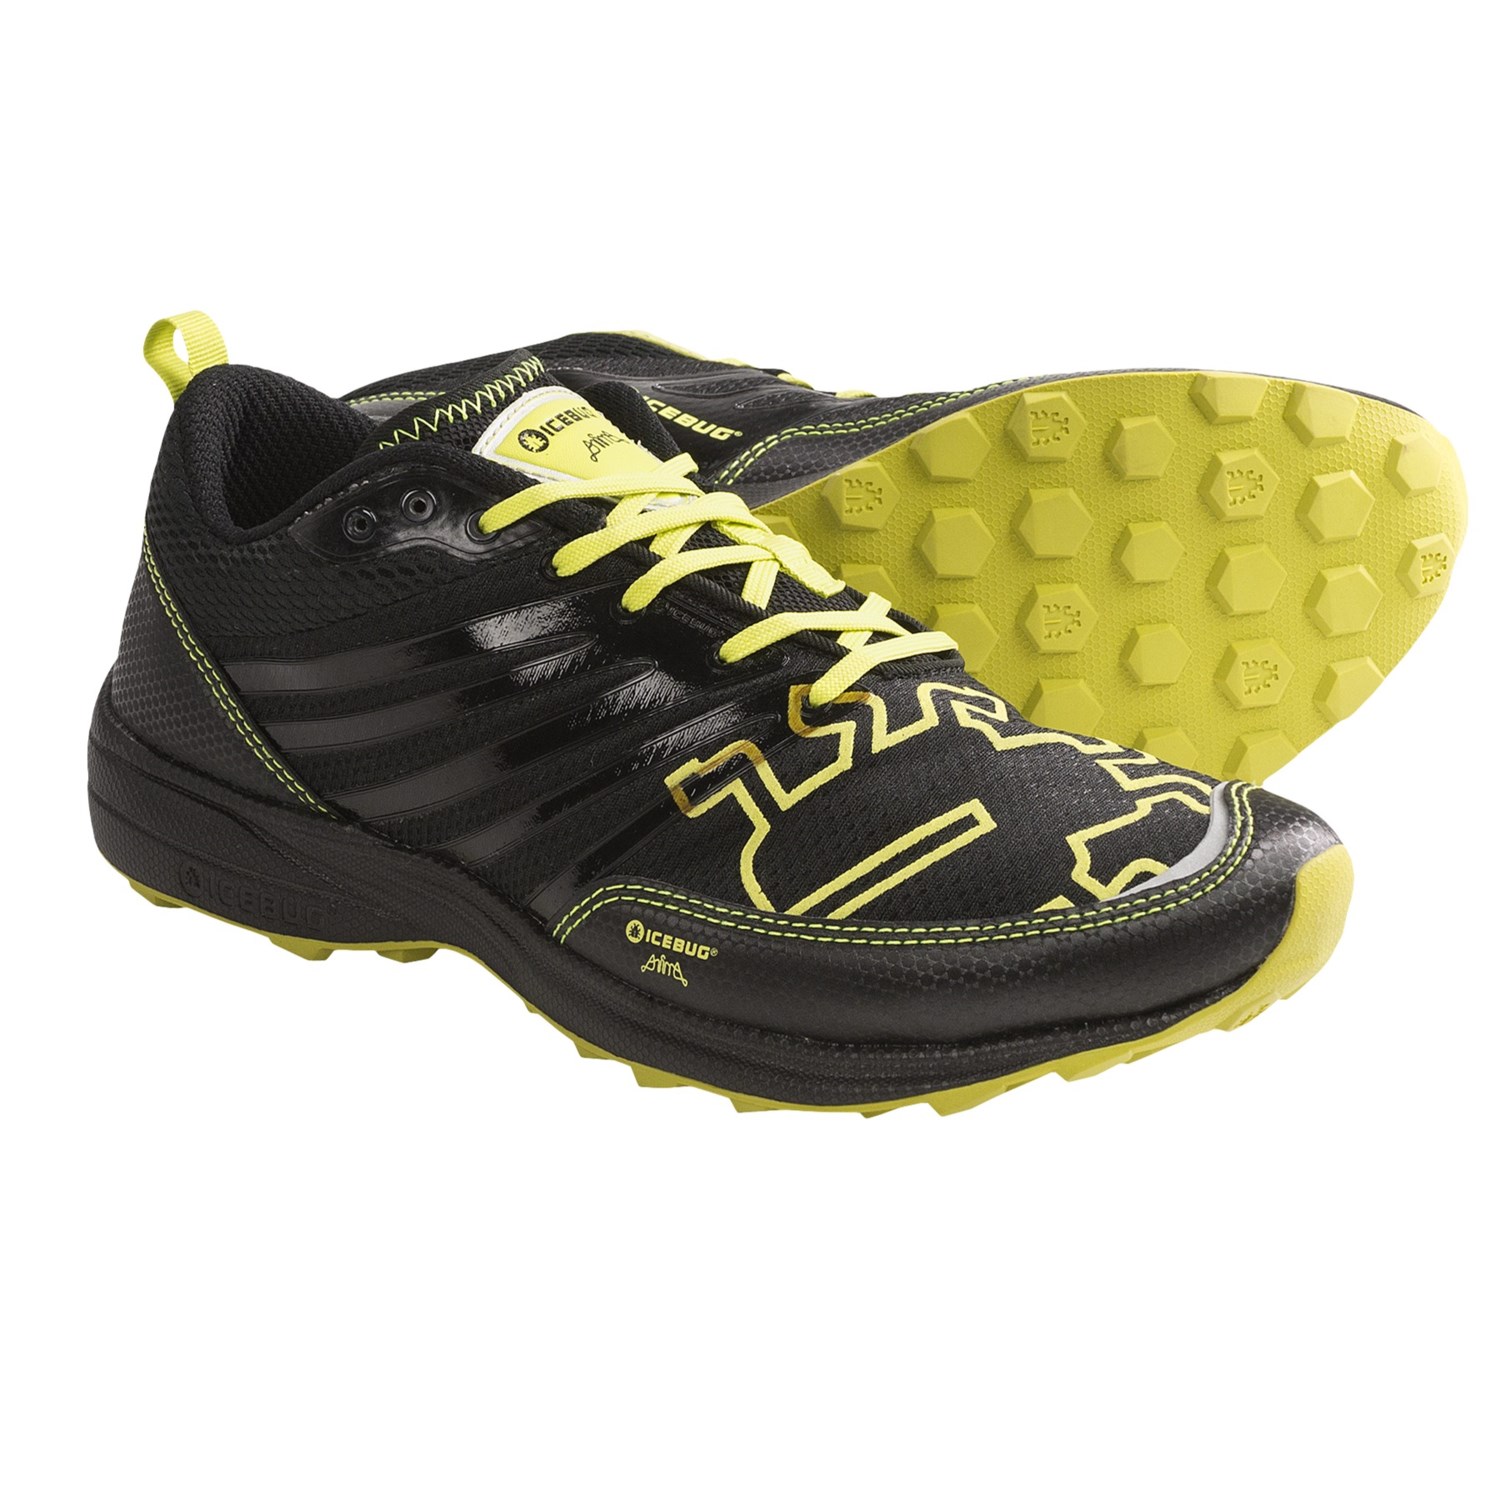 Icebug Anima Trail Running Shoes (For Men) 6536H - Save 52%